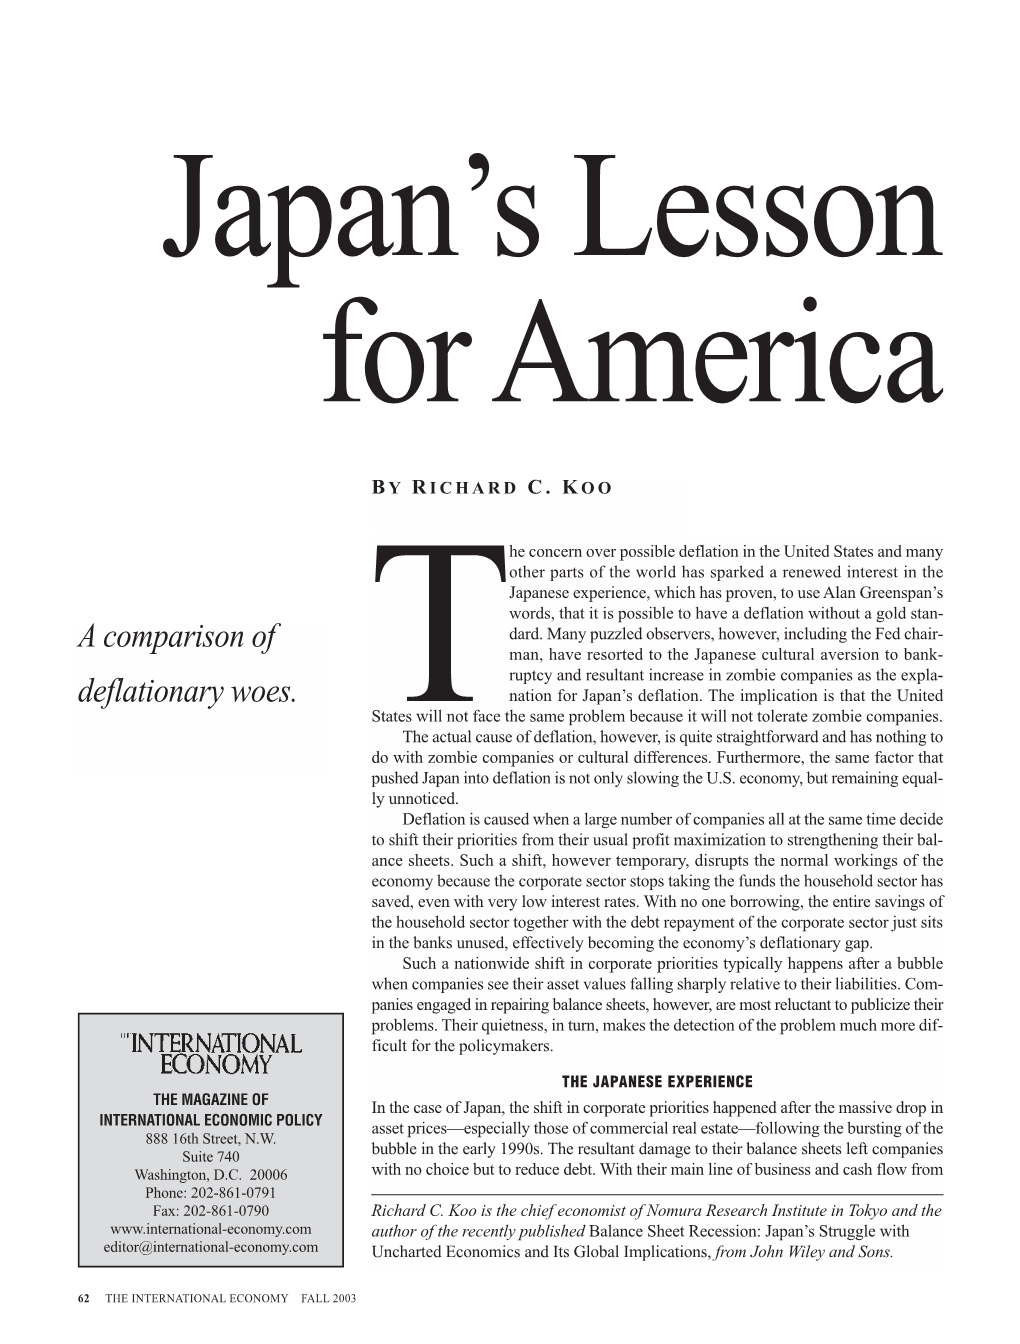 Japan's Lesson for America